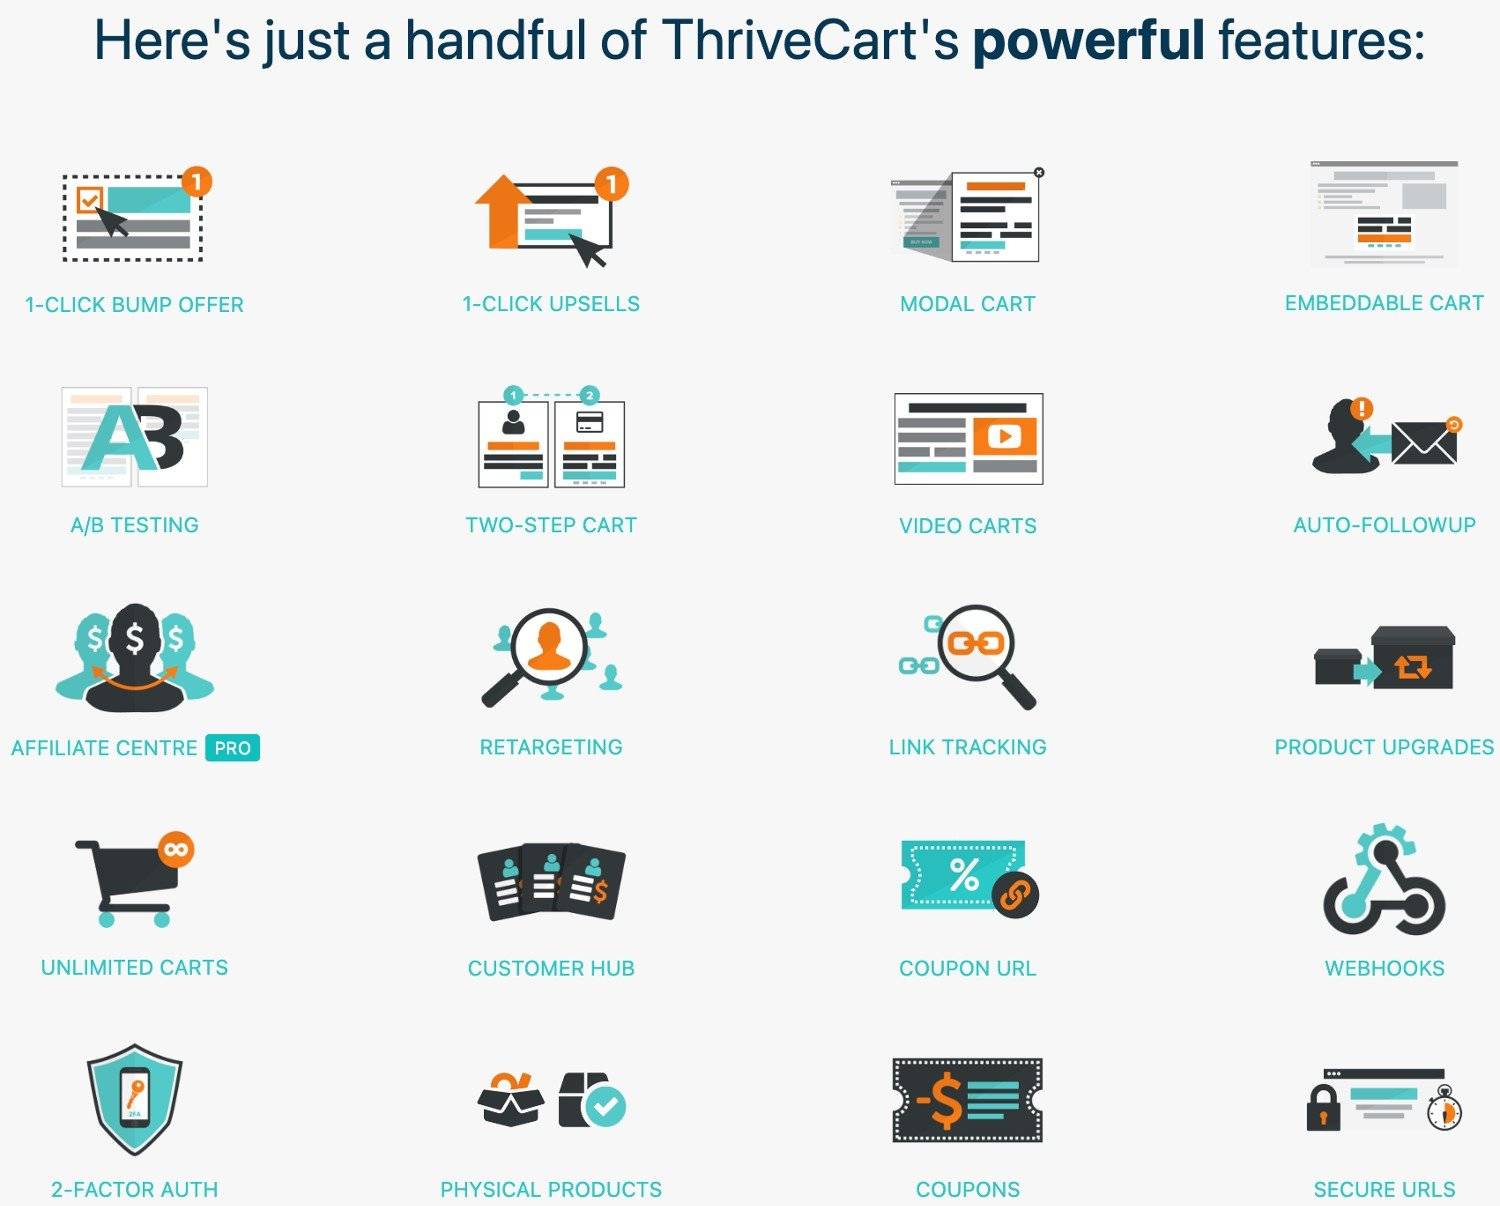 A handful of ThriveCart's powerful shopping cart features for more sales